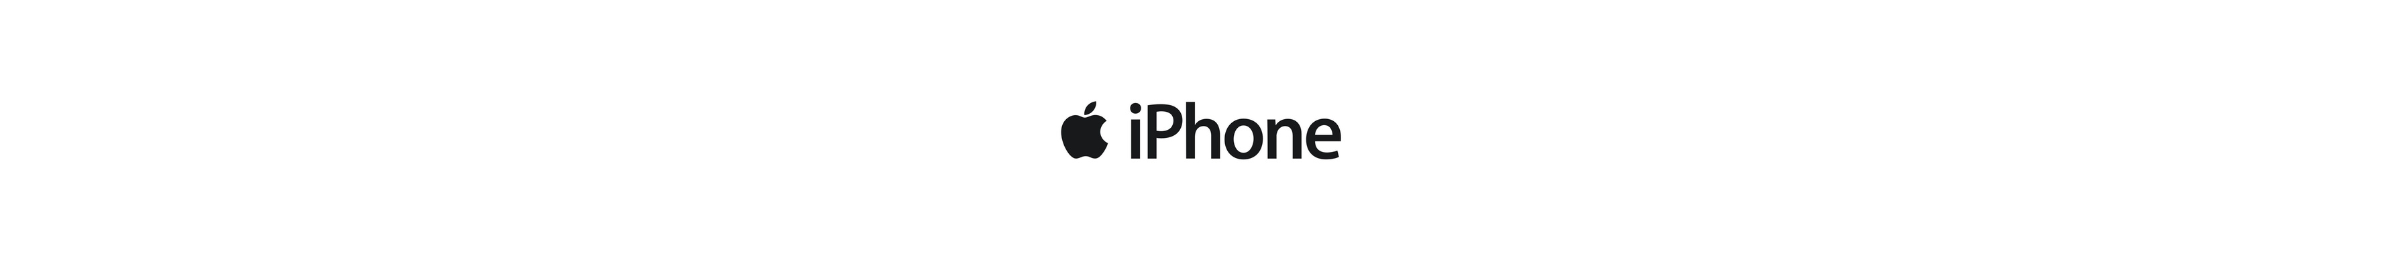 2400x270_banner_logo_iPhone-2.png